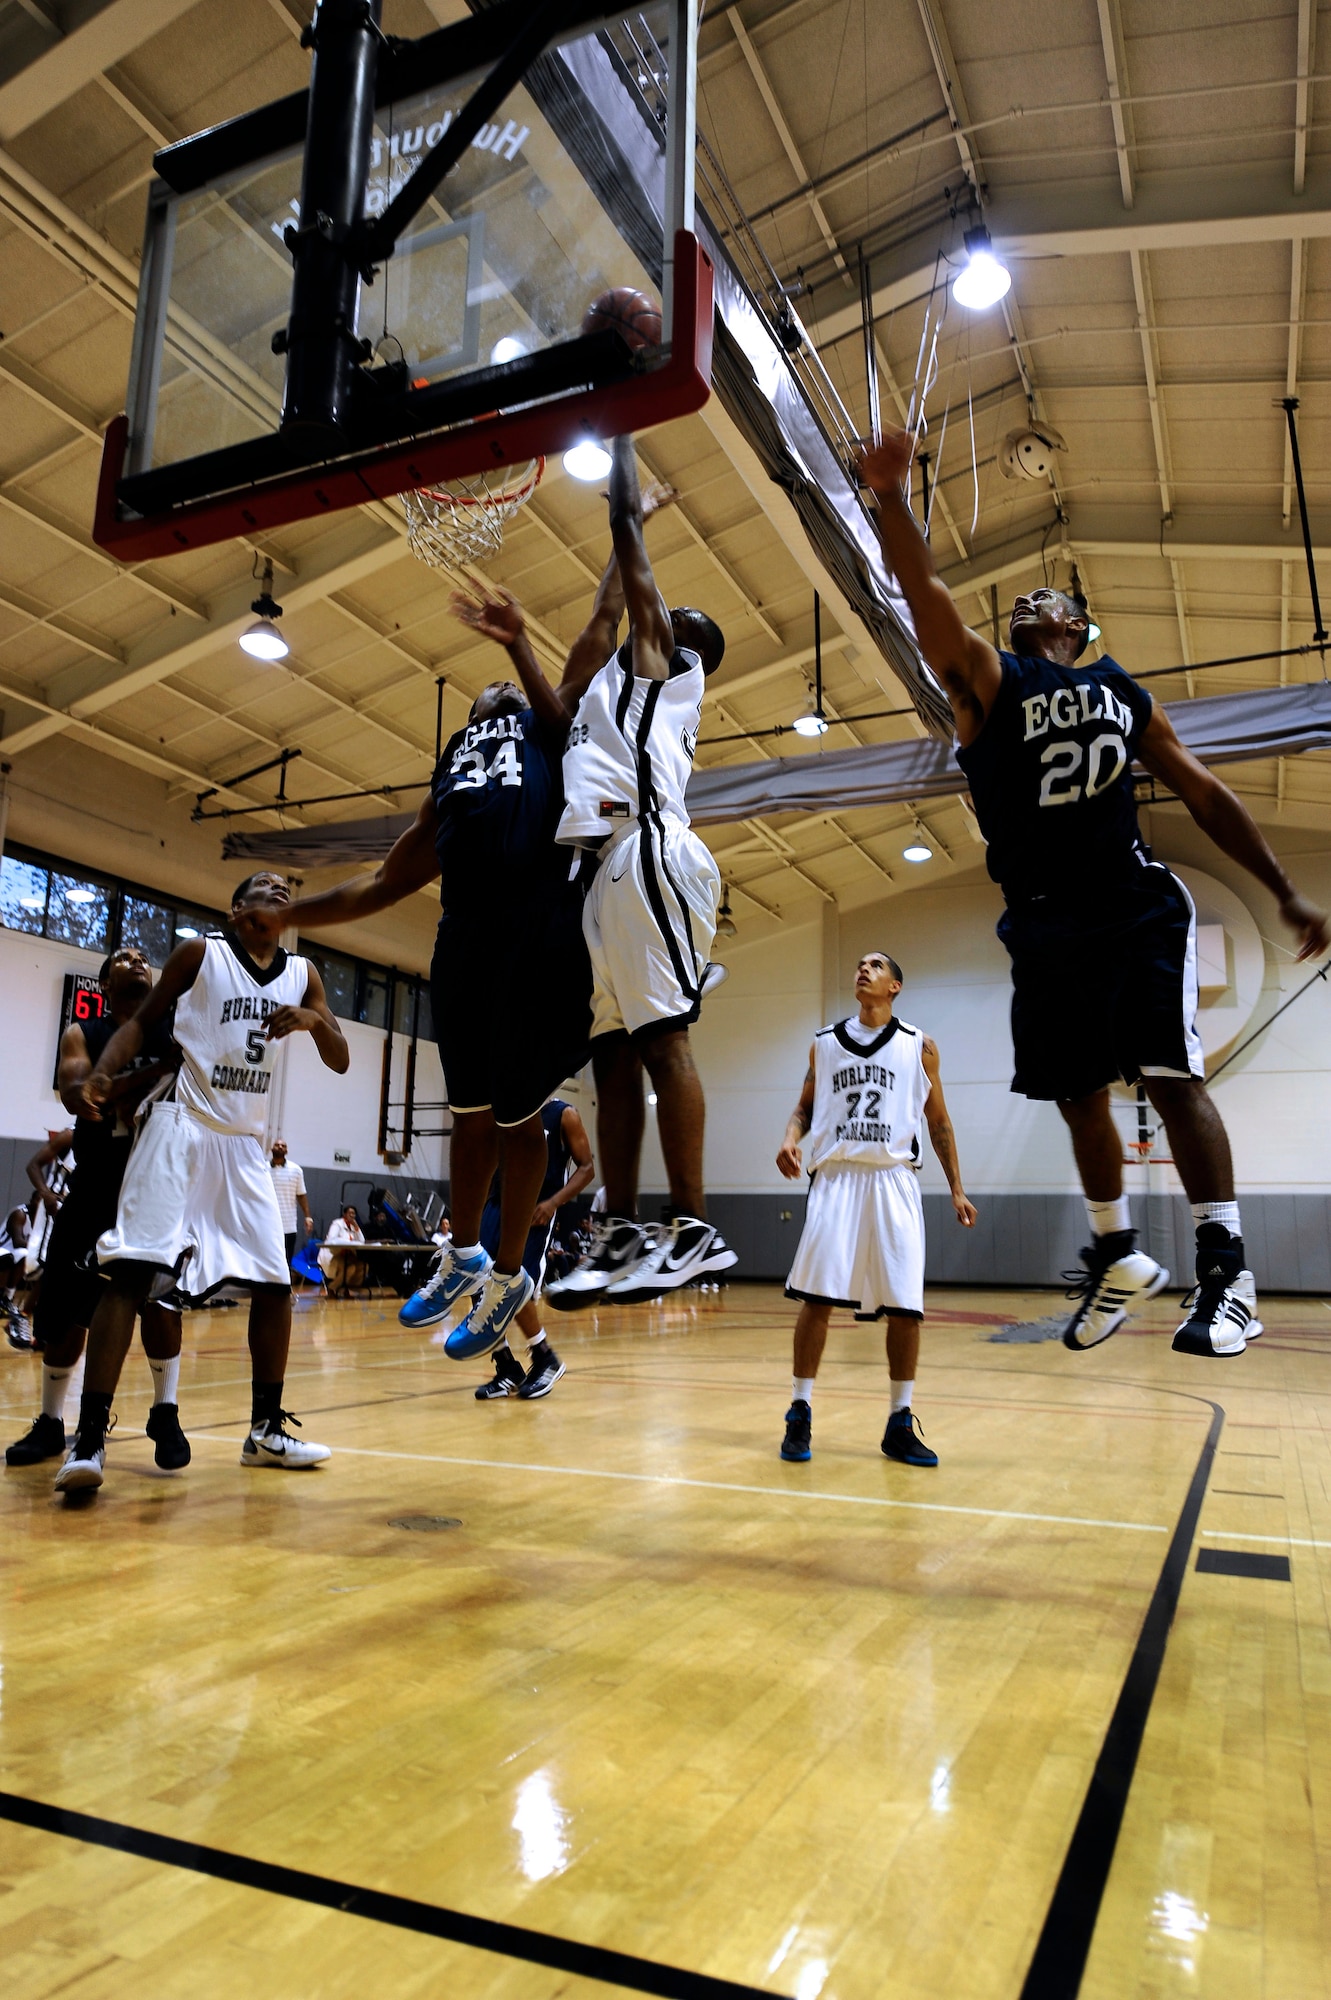 U.S. Air Force Tech. Sgt. Taveres Simpson, small forward for the Hurlburt Field Commandos basketball team, leaps into the air to score a point during a game at the Aderholt Fitness Center on Hurlburt Field Fla., Nov 19, 2011.  Simpson has been playing with the Hurlburt Field Commandos for three years. (U.S. Air Force photo/Airman 1st Class Gustavo Castillo)(Released)